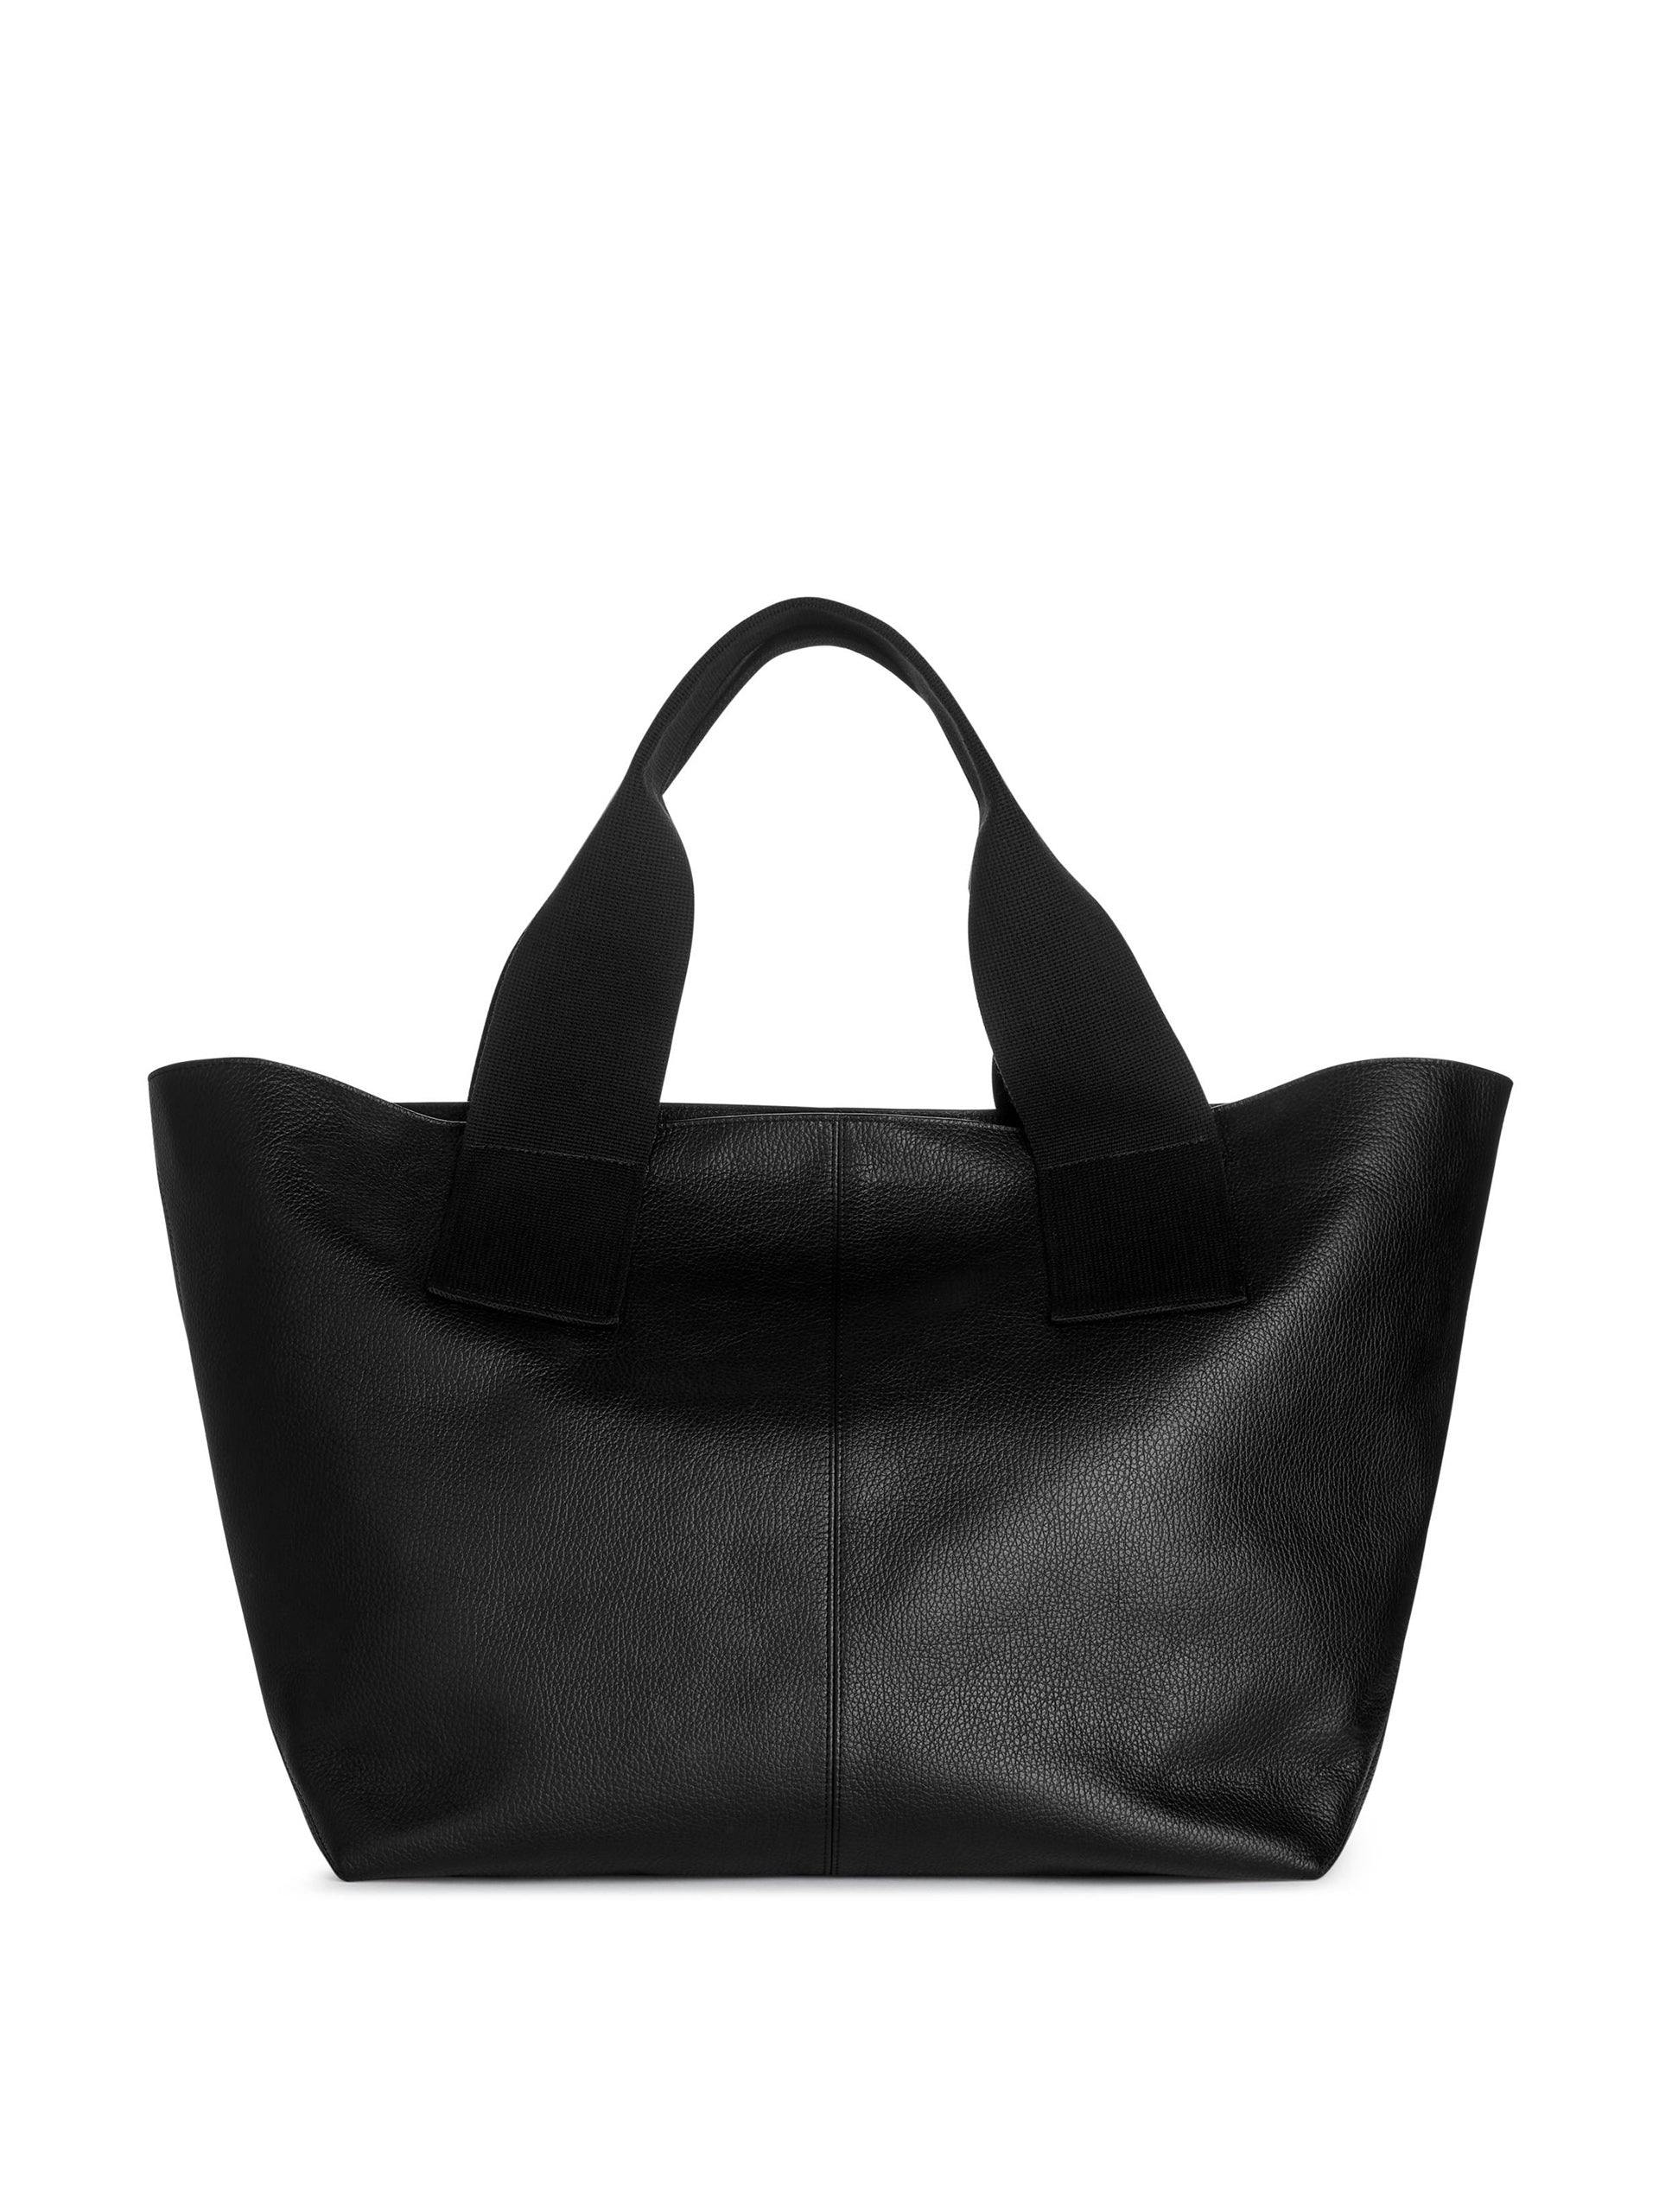 Large leather tote